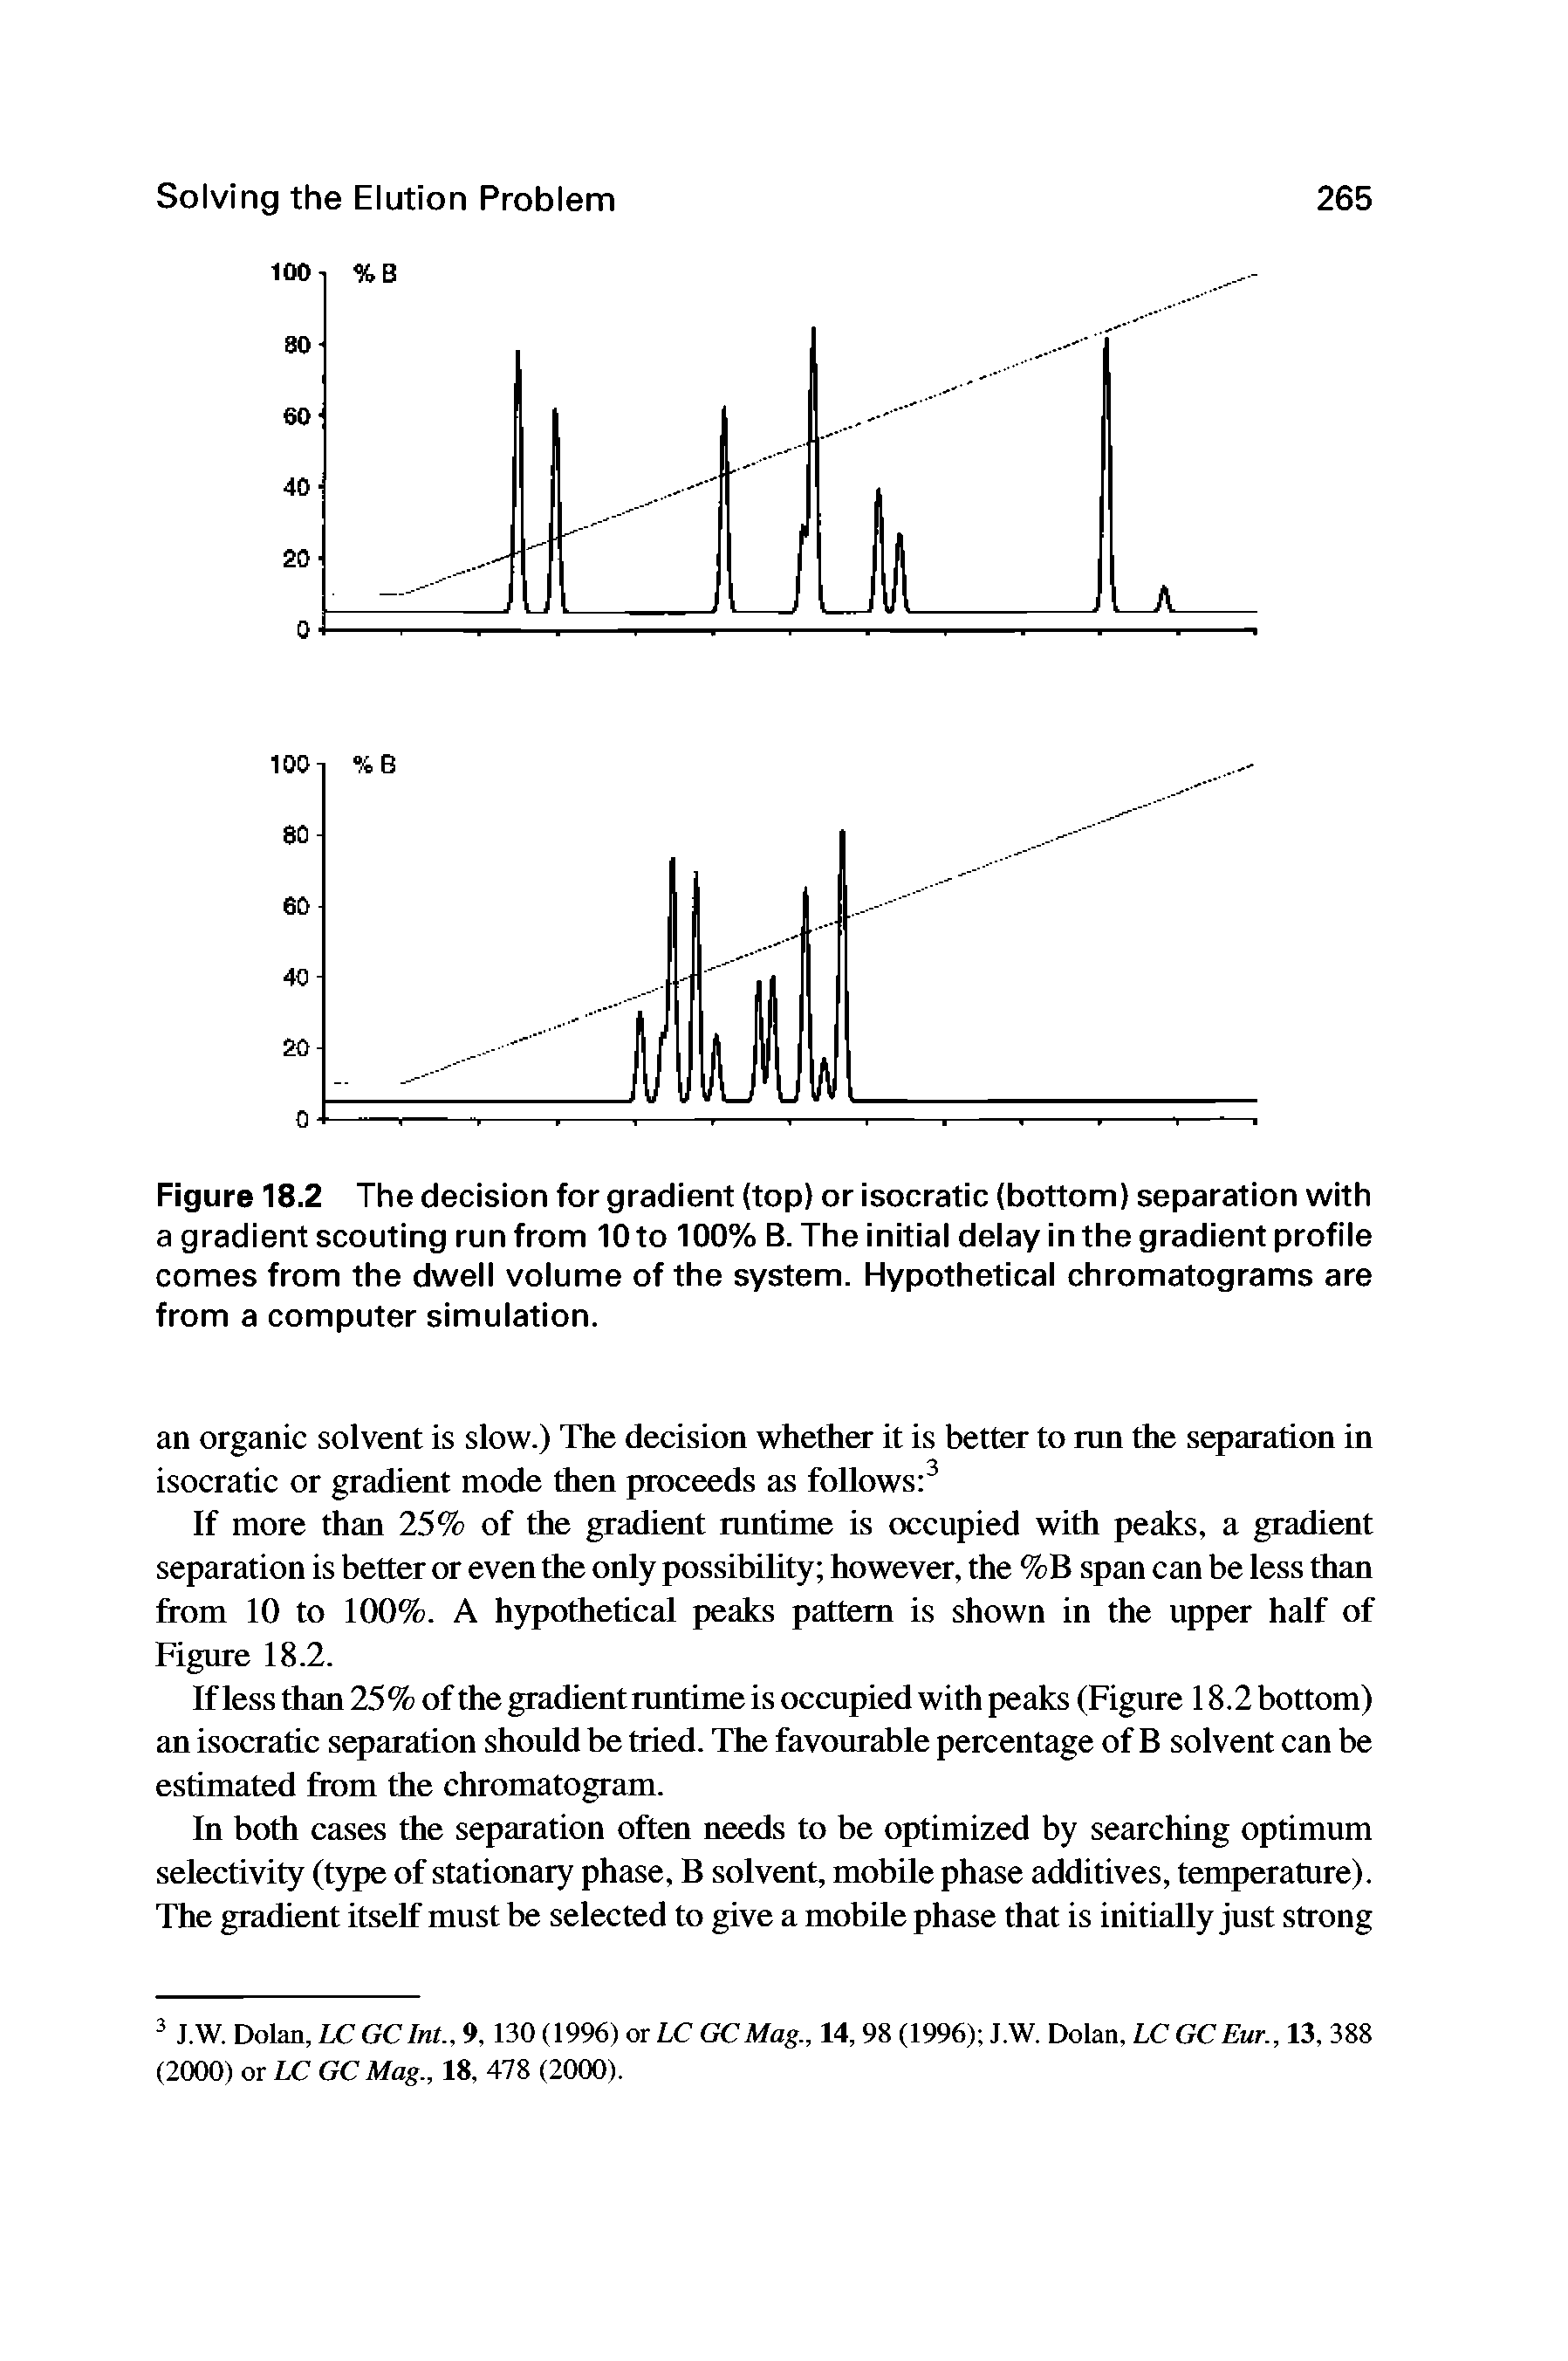 Figure 18.2 The decision for gradient (top) or isocratic (bottom) separation with a gradient scouting run from 10 to 100% B. The initial delay in the gradient profile comes from the dwell volume ofthe system. Hypothetical chromatograms are from a computer simulation.